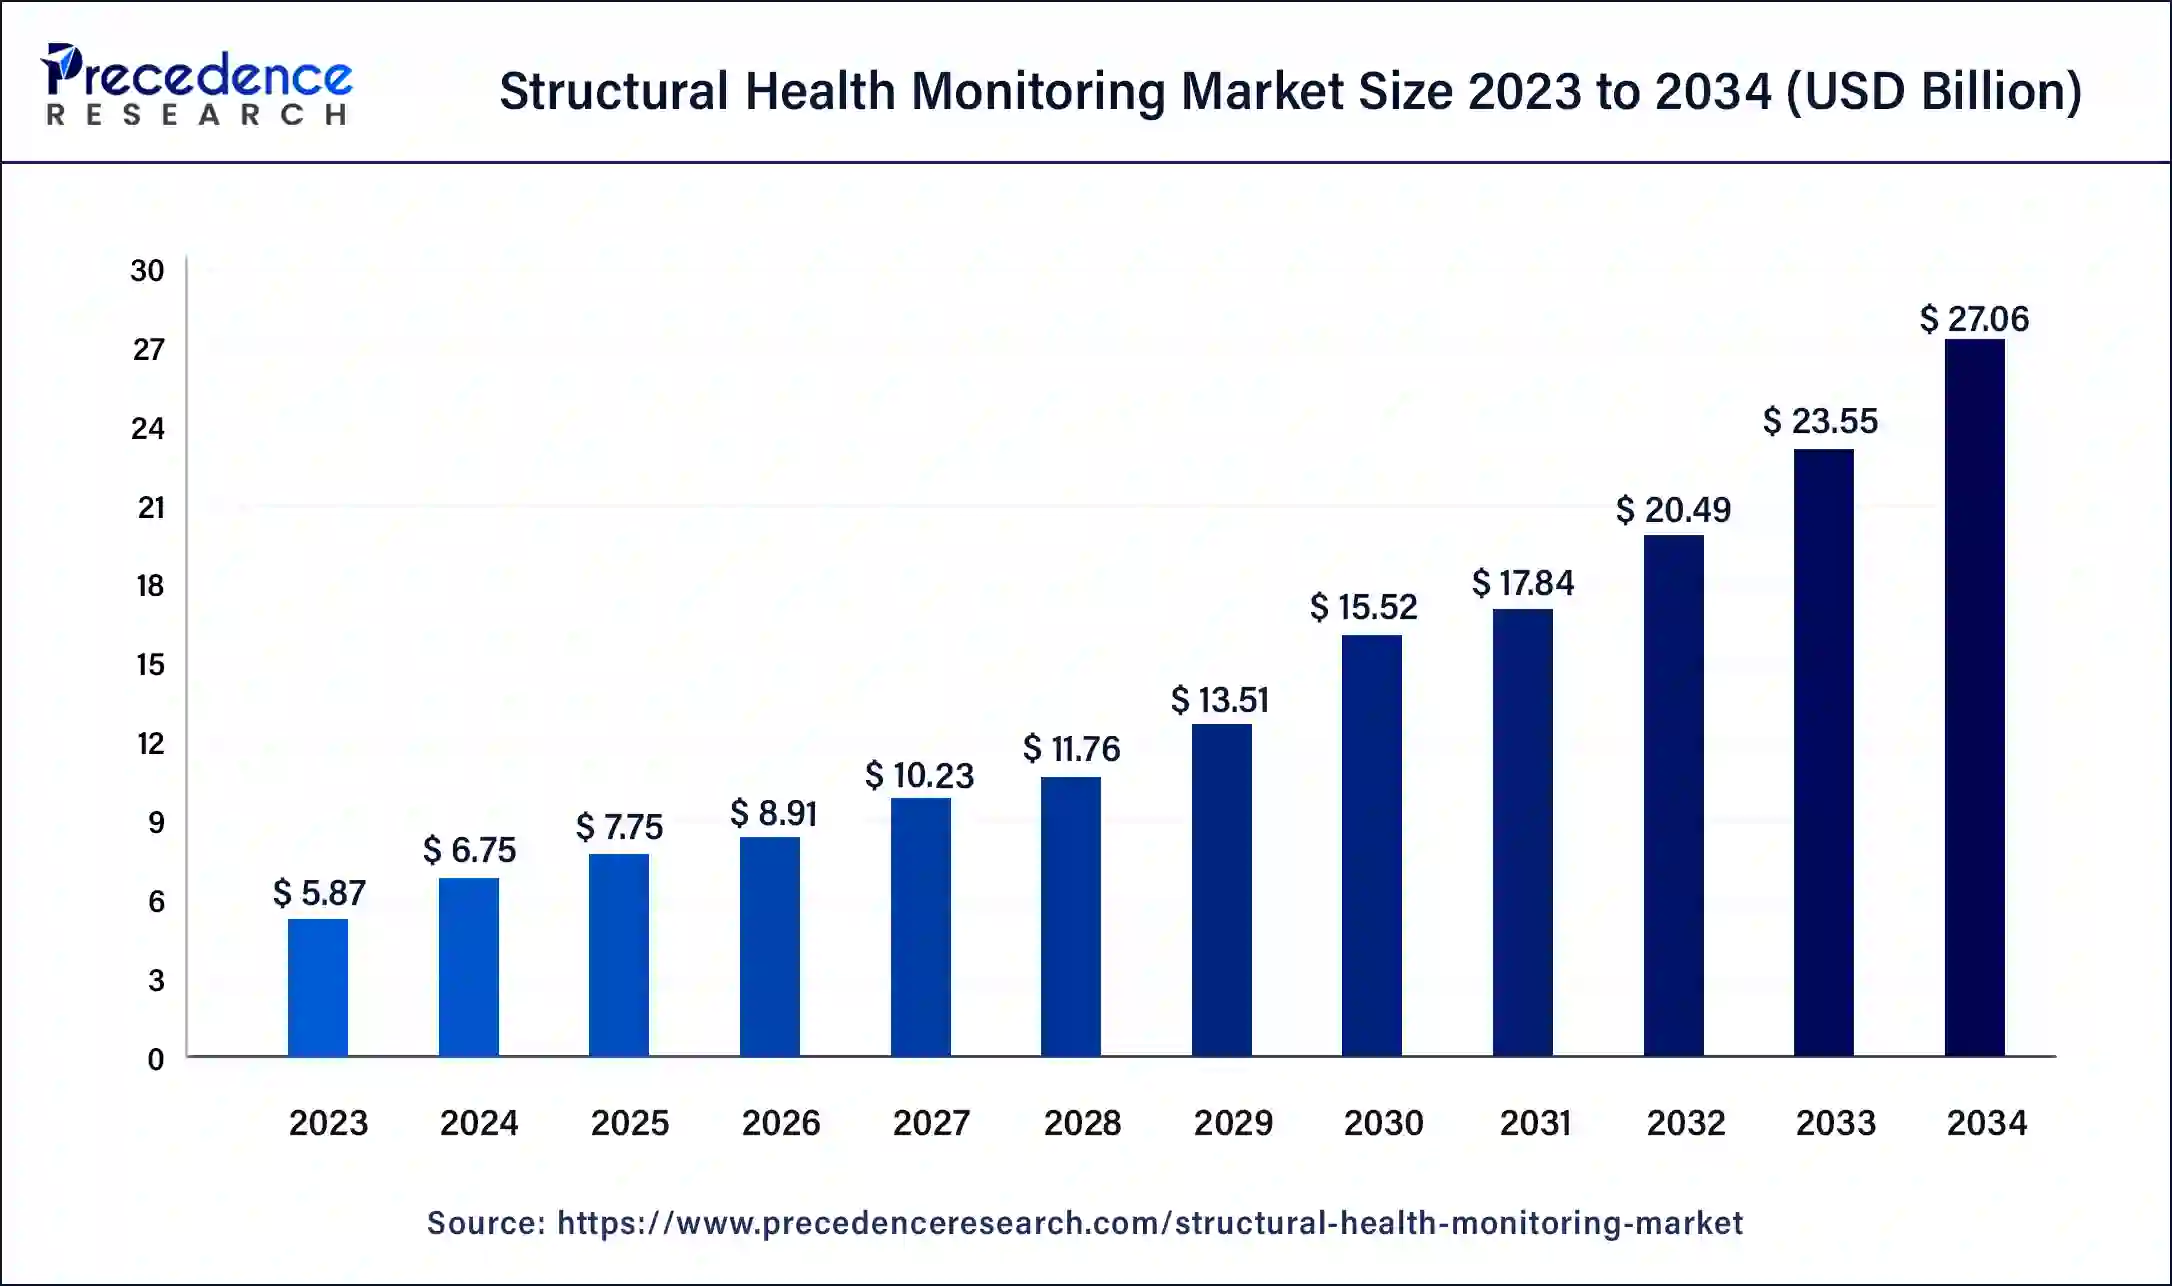 Structural Health Monitoring Market Size 2024 to 2034